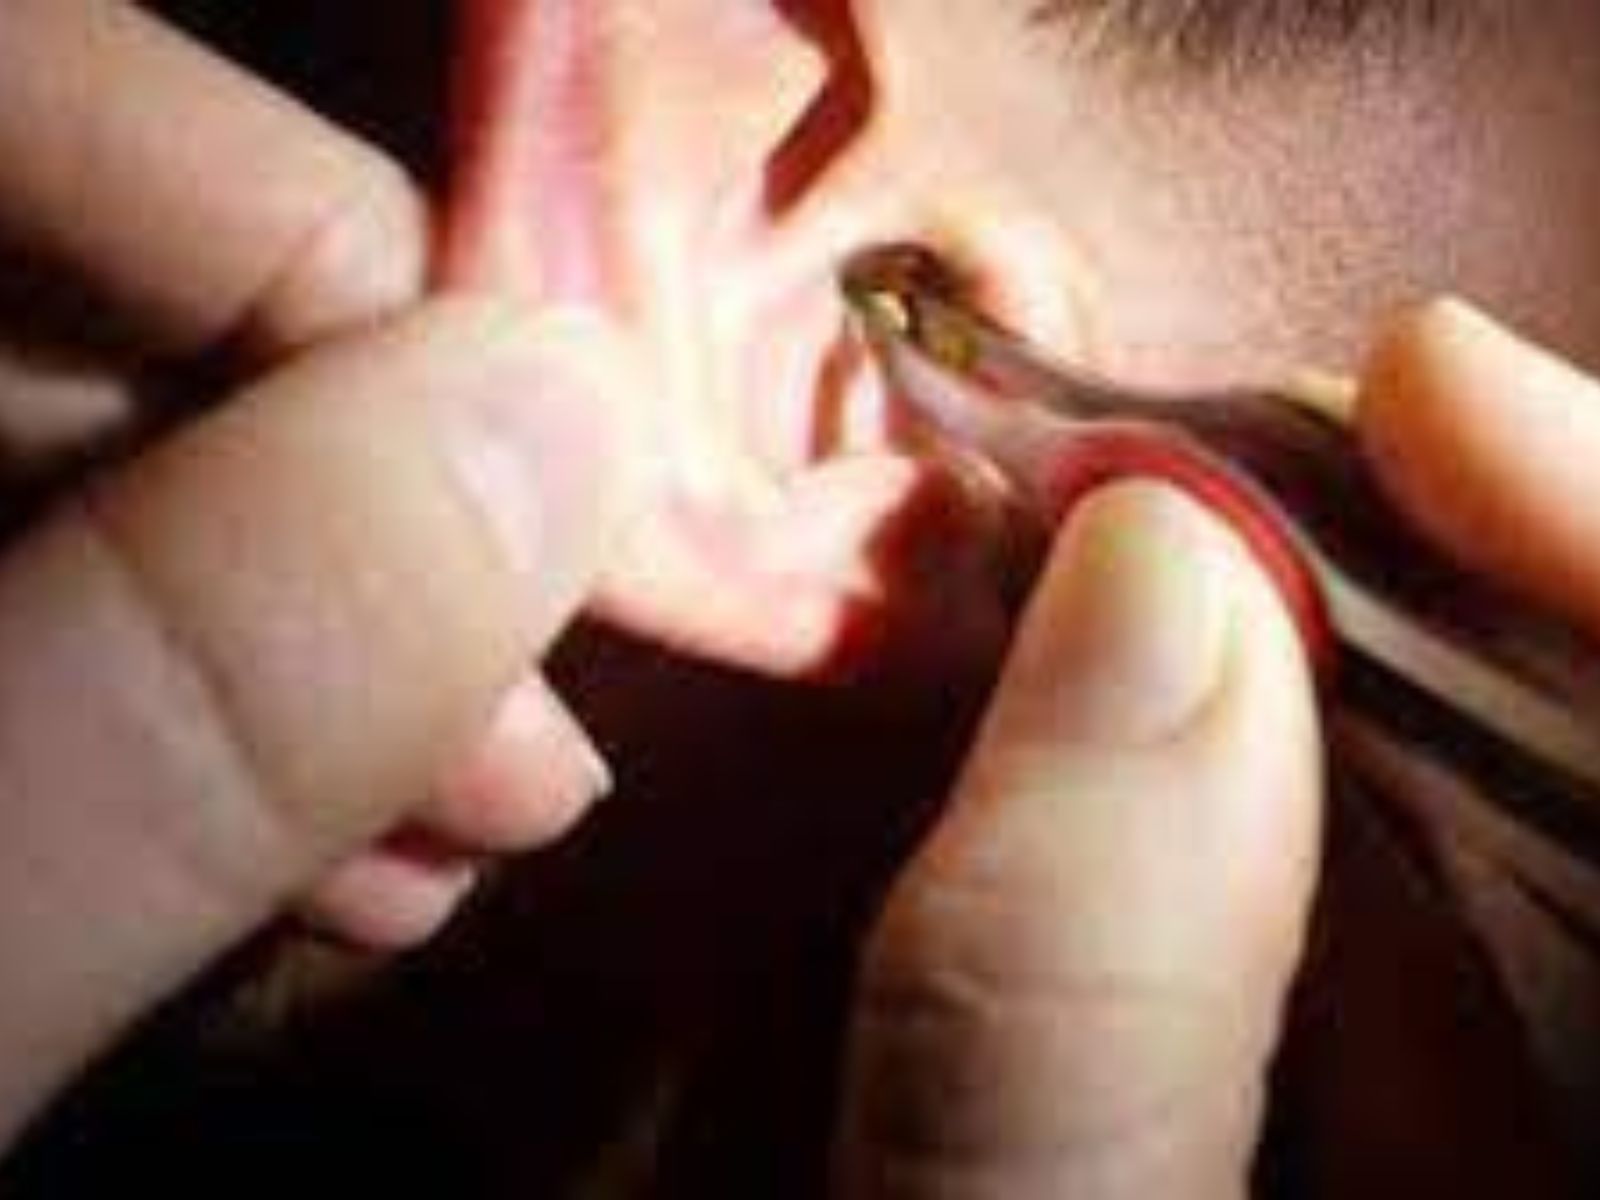 Manual Ear Wax removal for patient from Kimberley